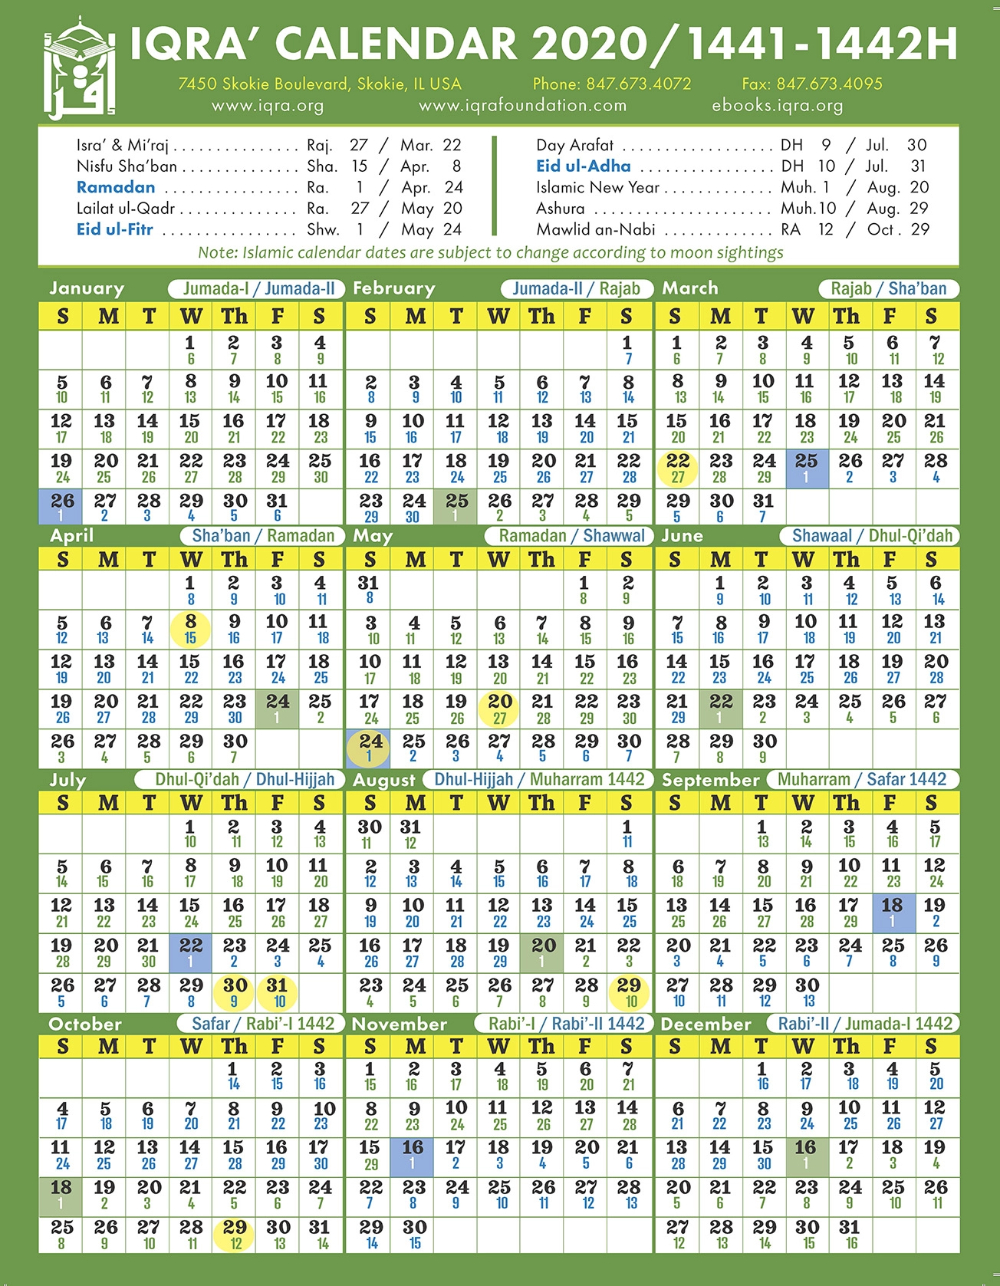 20+ Calendar 2021 With Islamic Dates - Free Download